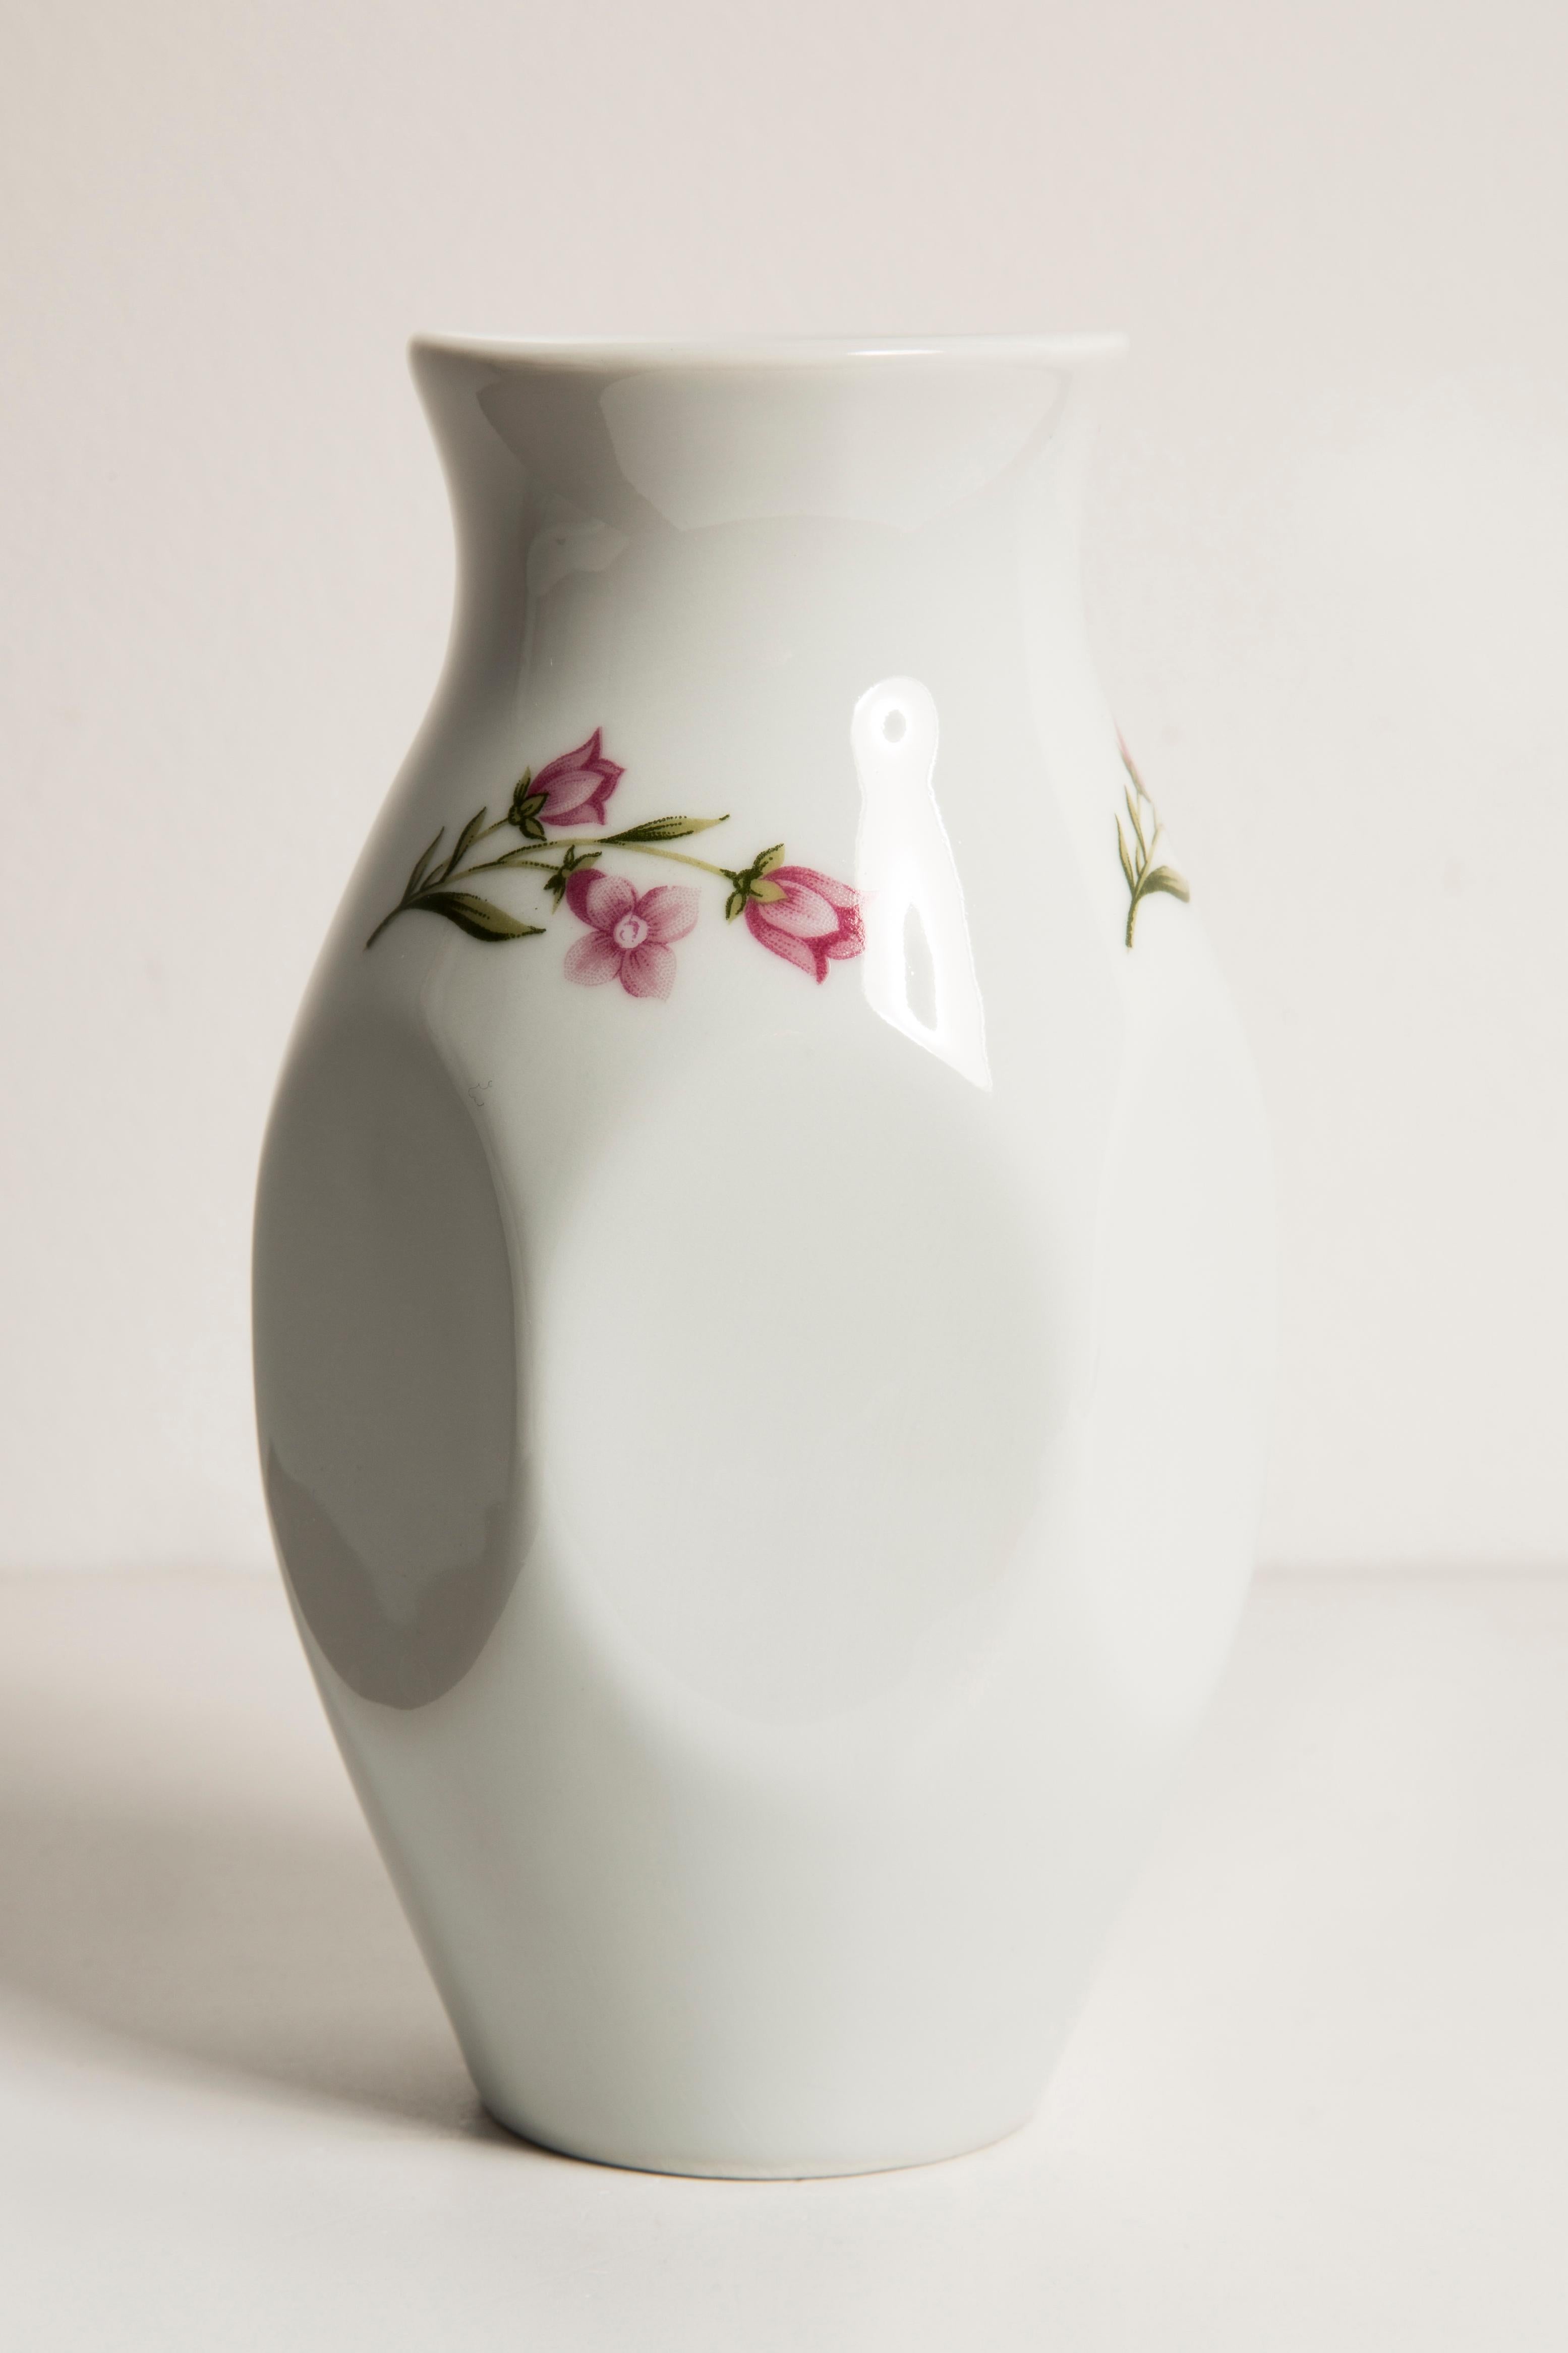 20th Century Midcentury Porcelain White Mini Vase with Roses, Hand Painted, Europe, 1960s For Sale